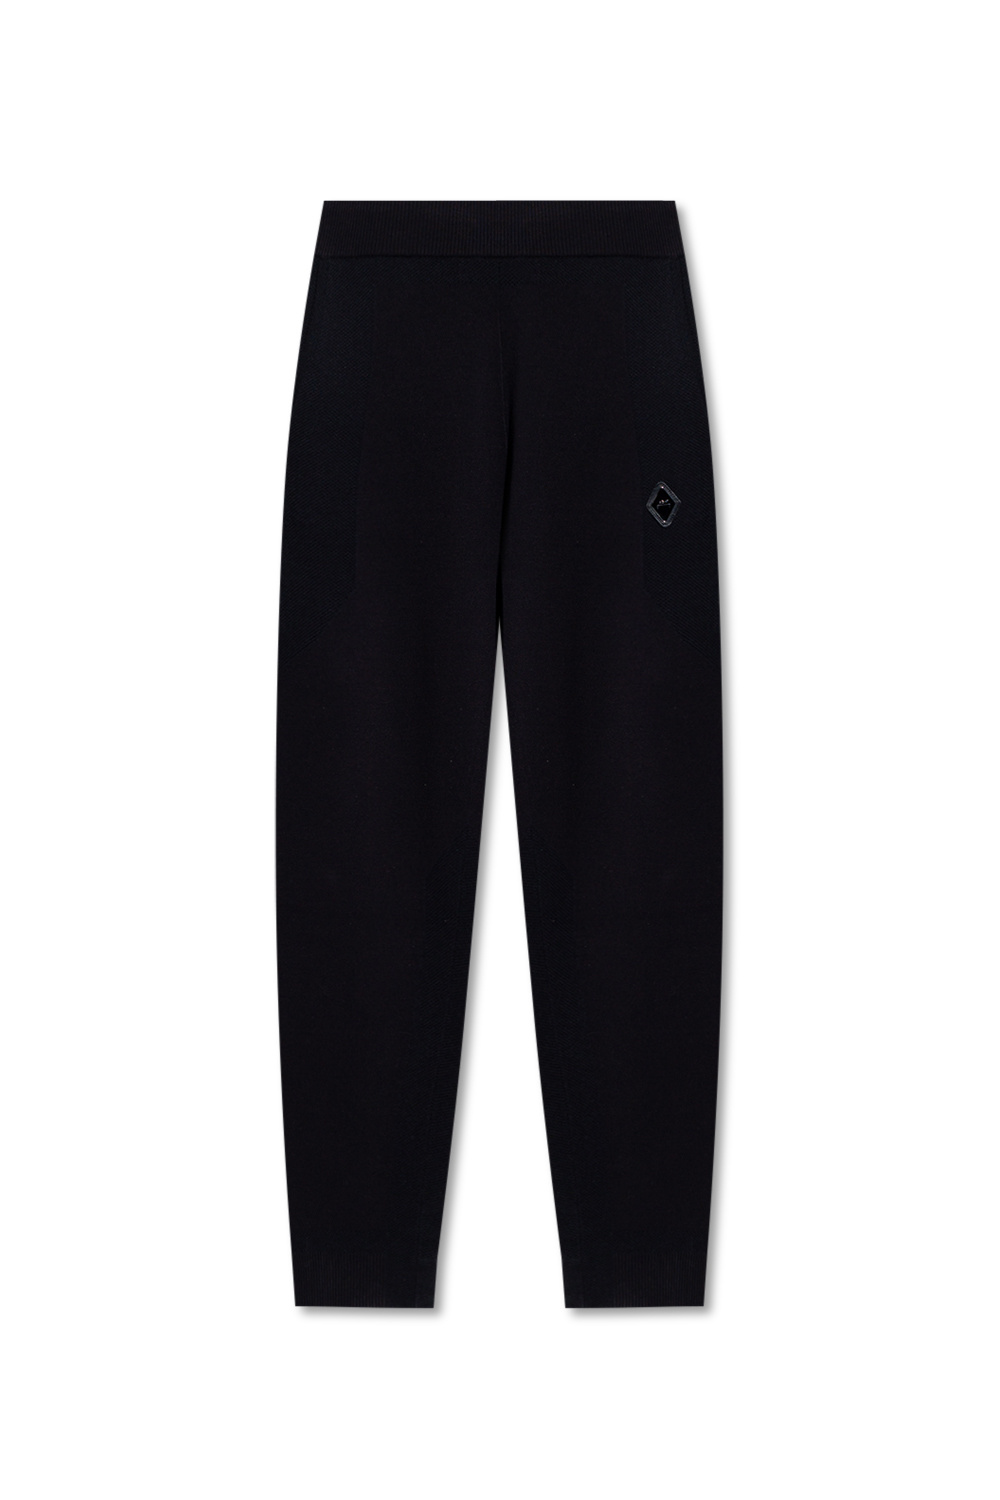 A-COLD-WALL* Nike Ekiden Pack Therma Essential Mens Track Pants